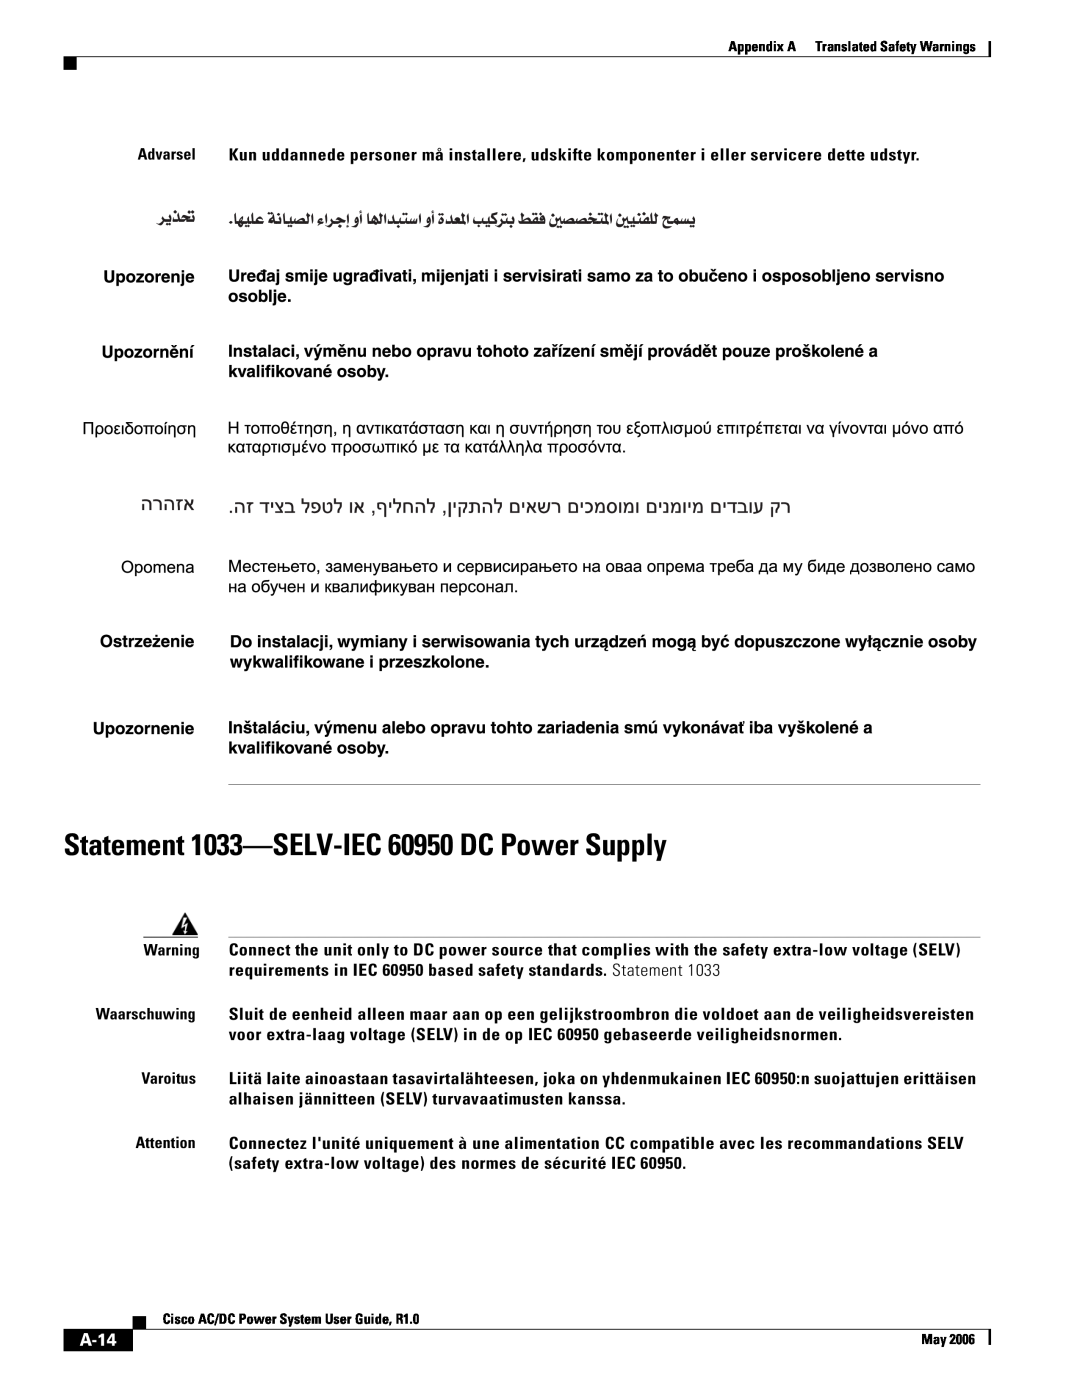 Cisco Systems 159330, 124792, 124778 manual Statement 1033-SELV-IEC 60950 DC Power Supply, A-14 